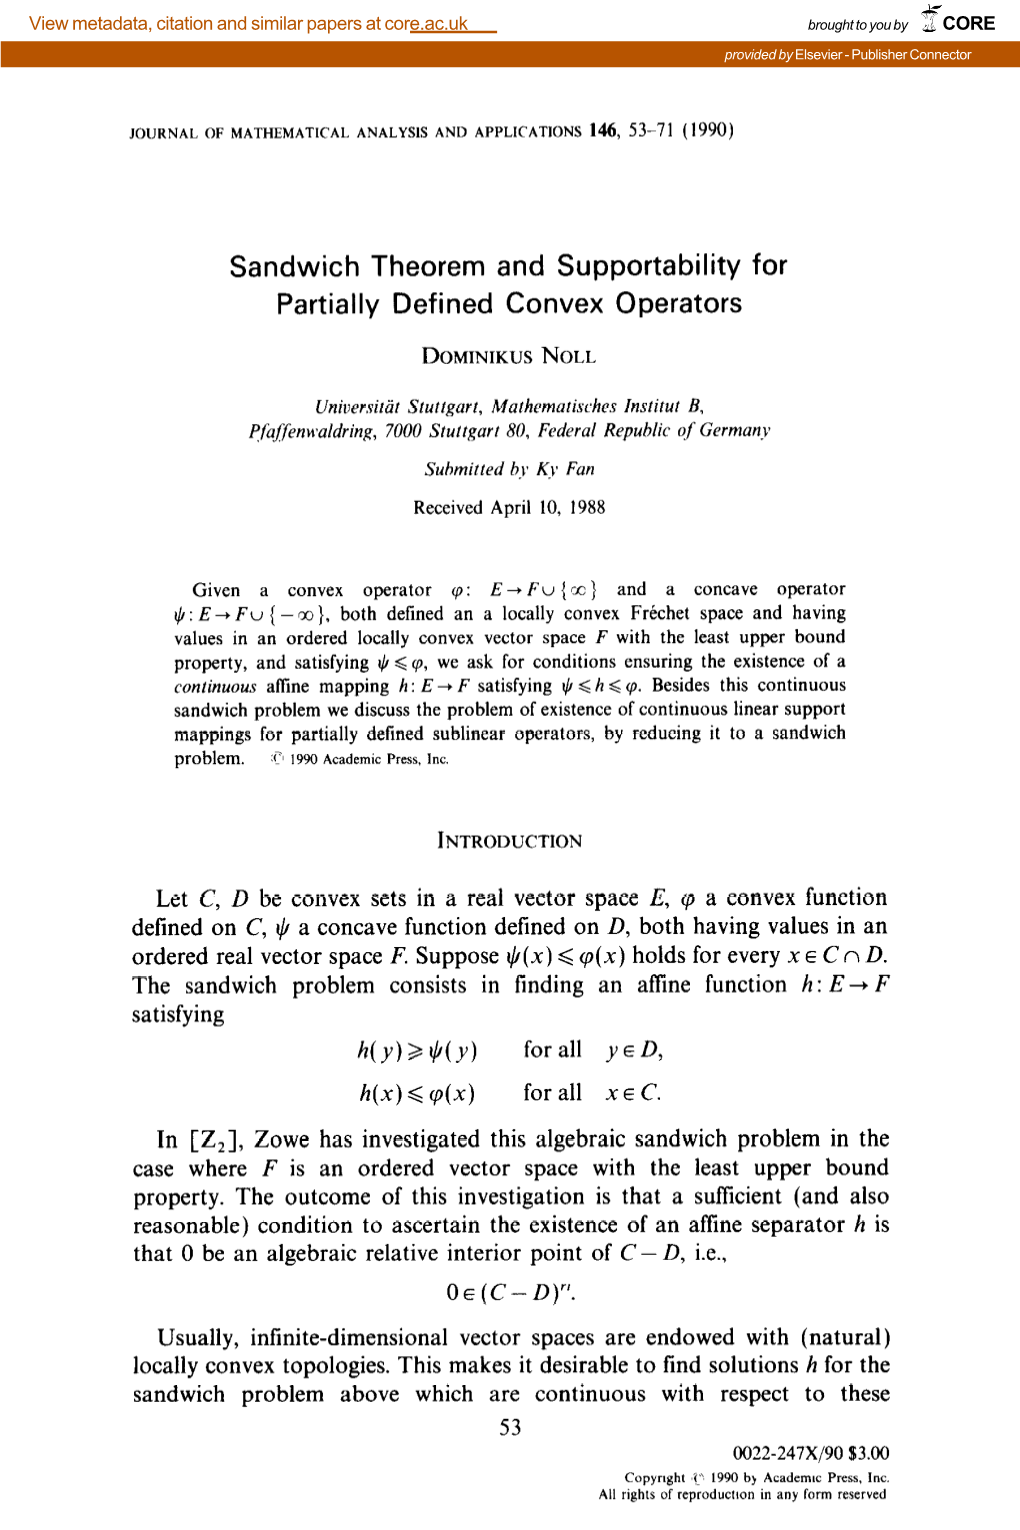 Sandwich Theorem and Supportability for Partially Defined Convex Operators